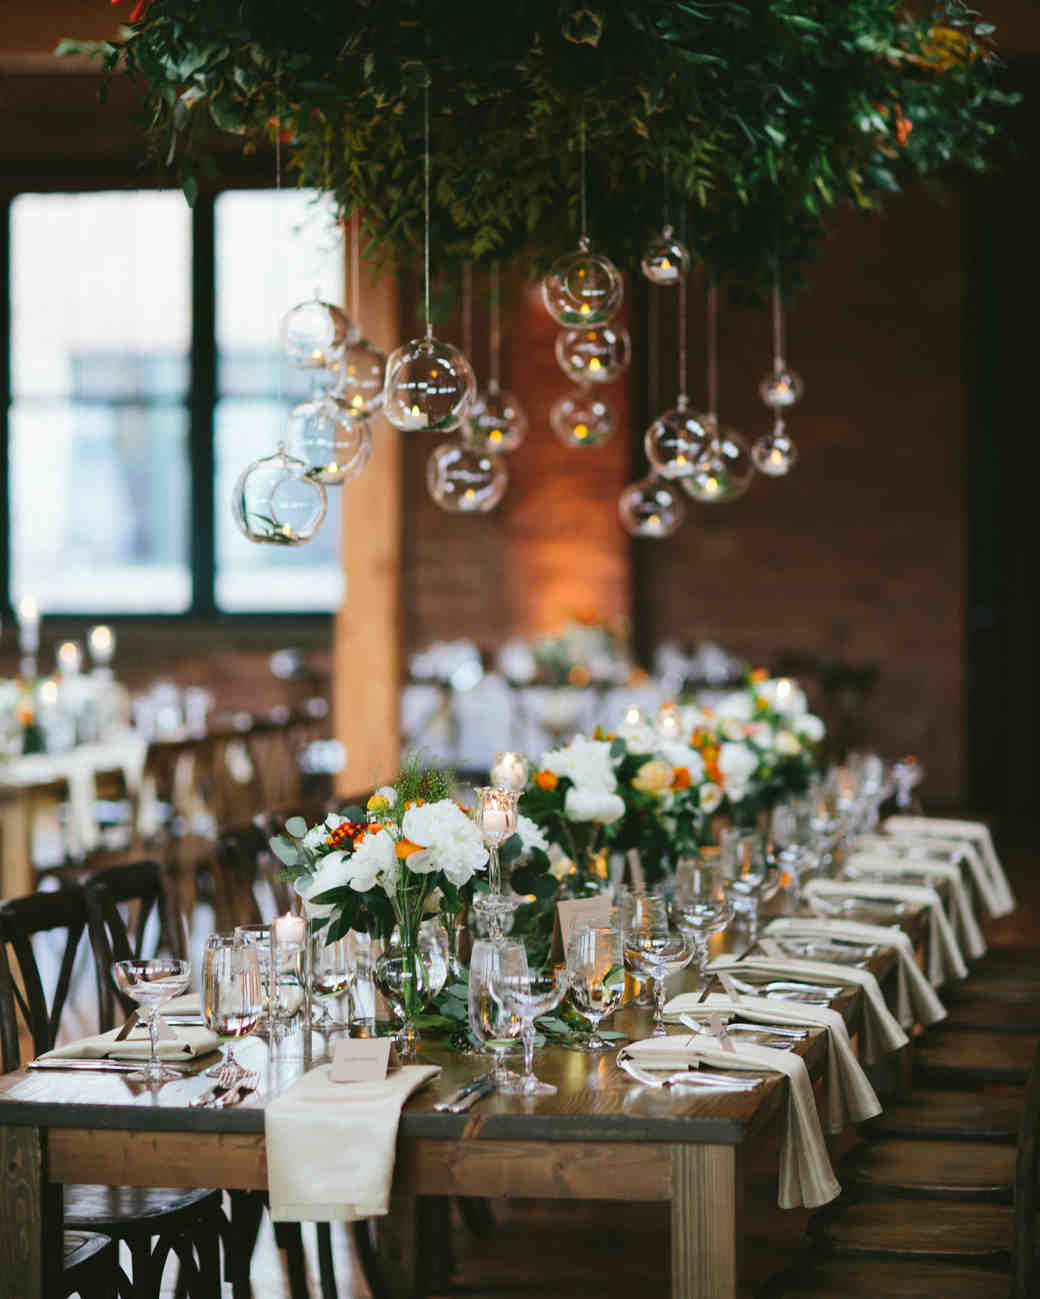 28 Ideas for Sitting Pretty at Your Head Table | Martha ...